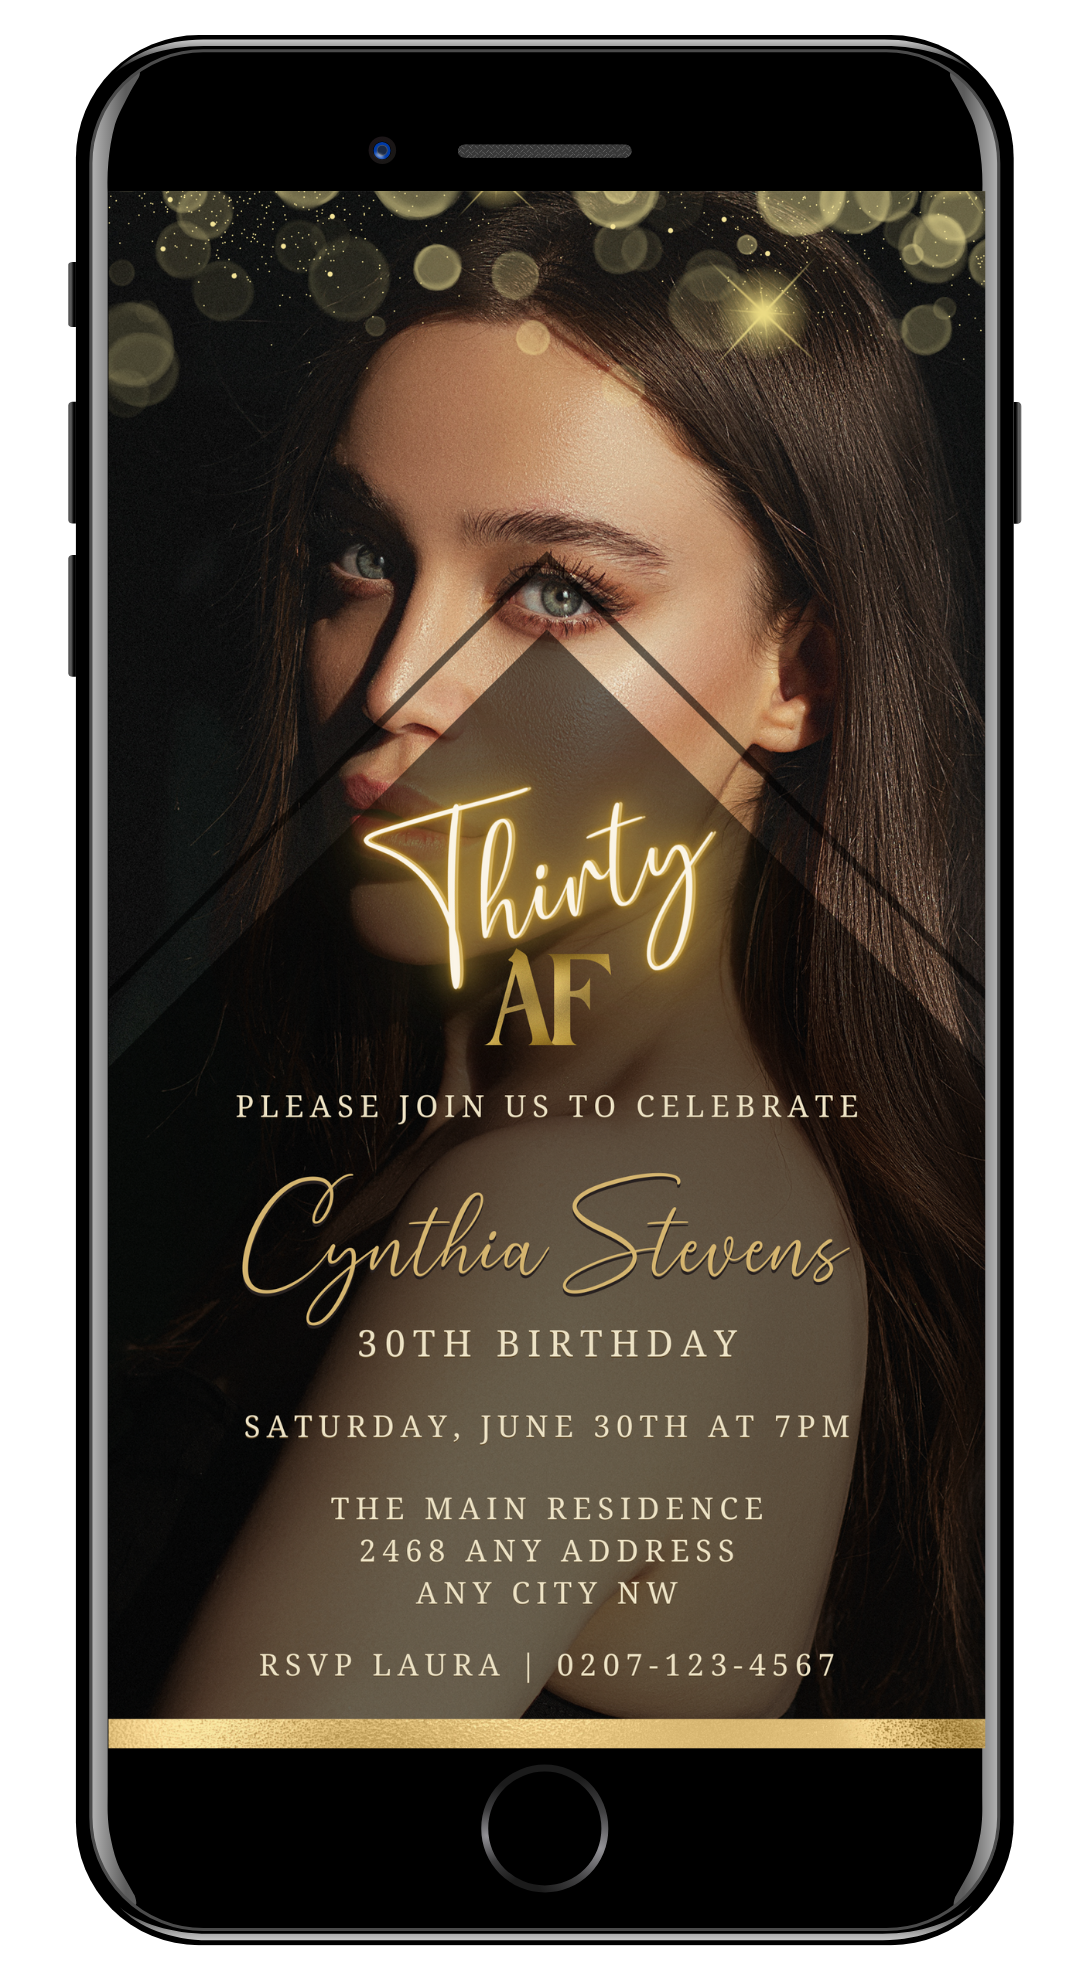 A customizable digital photo background for a 30th birthday evite, showing a woman's face on a smartphone screen, easily editable via Canva.